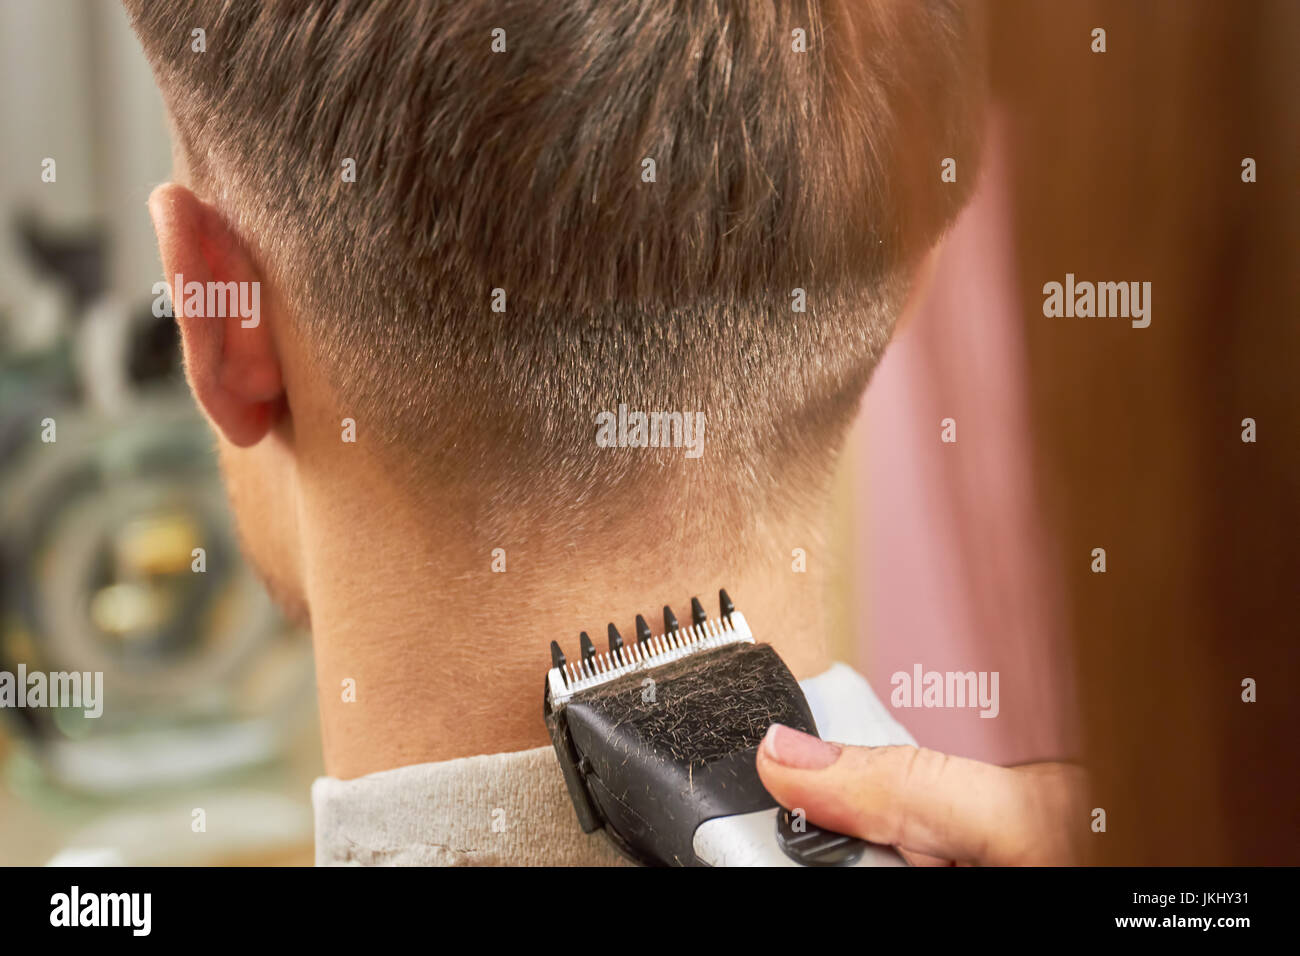 1881 Man Hairstyle Back Side Images Stock Photos  Vectors  Shutterstock